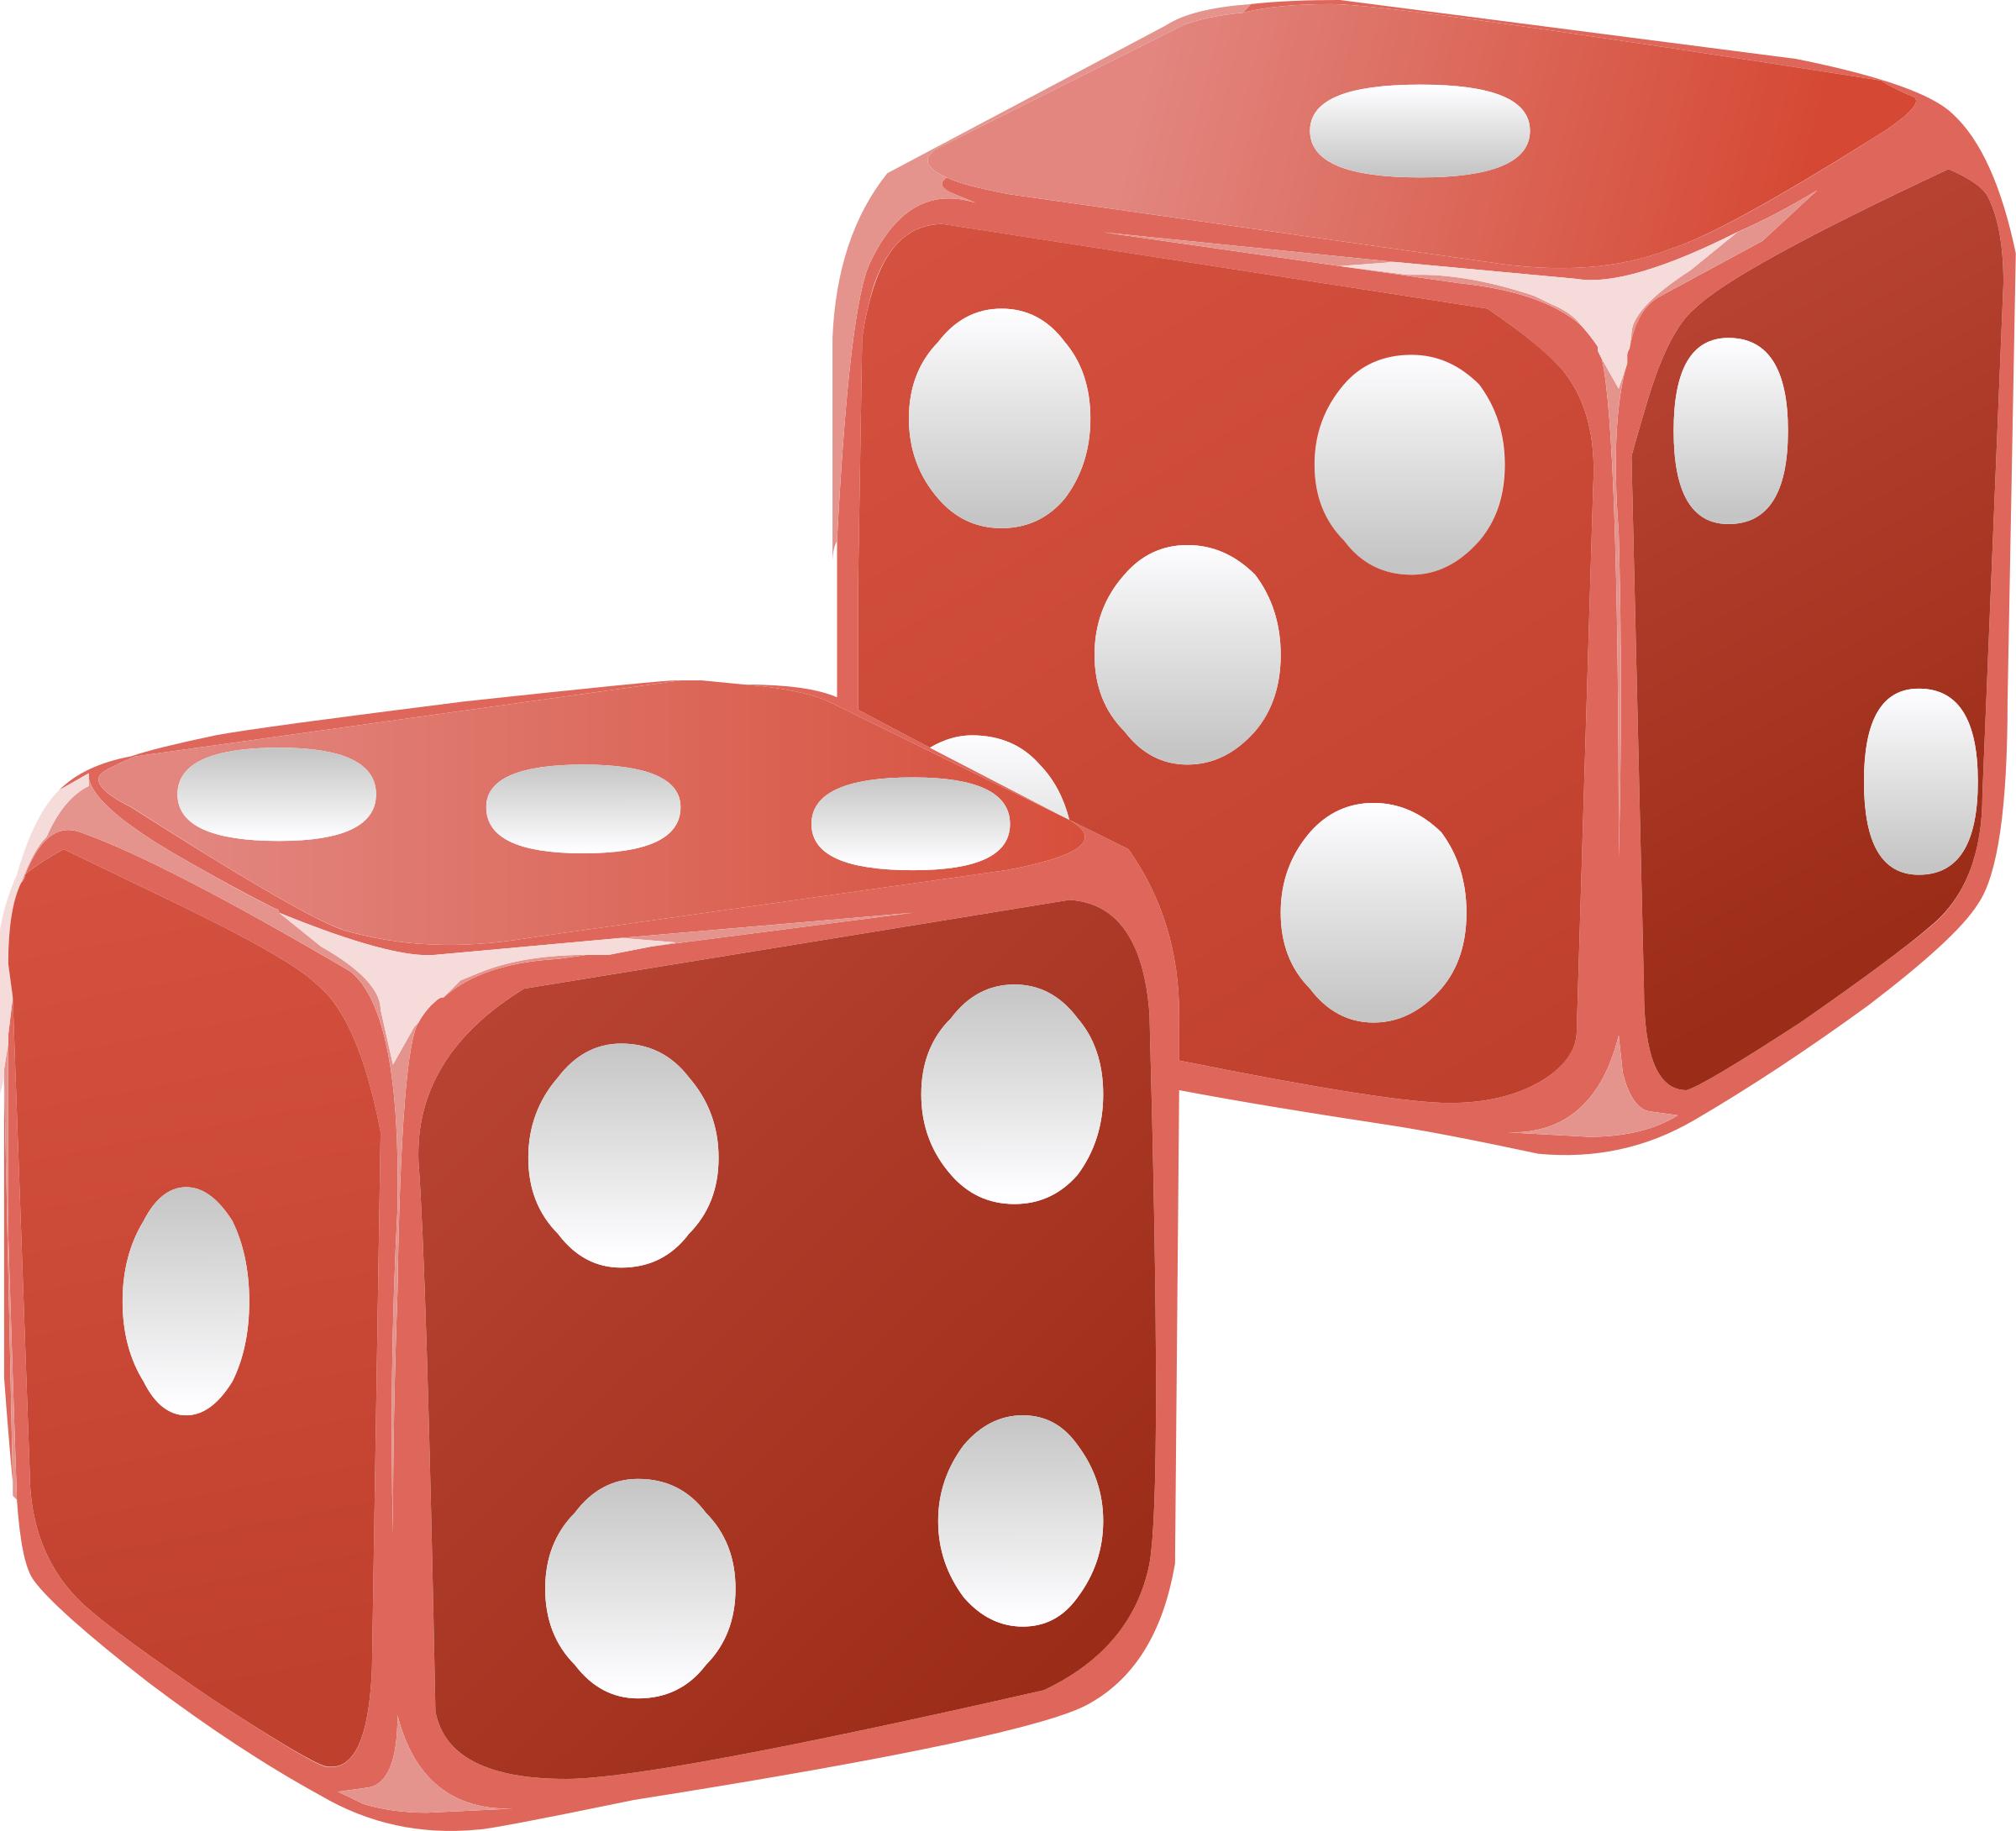 Misc Dice png